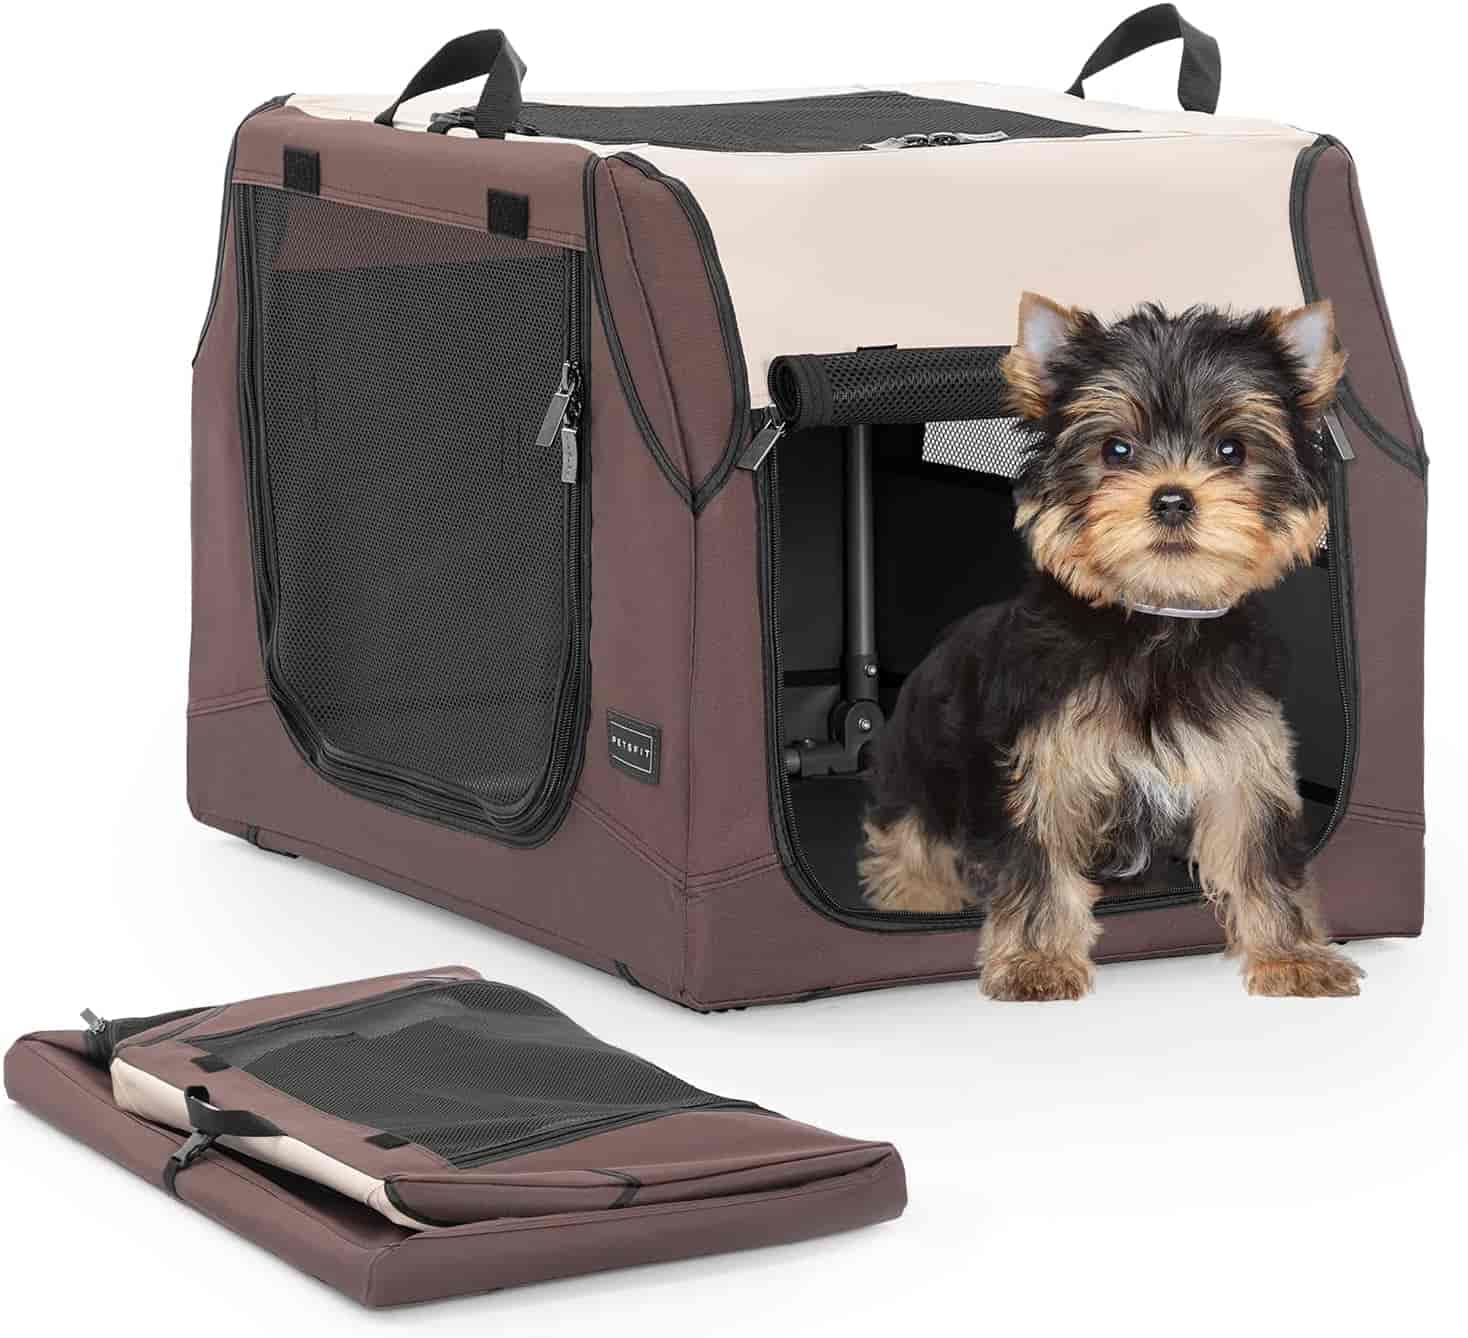 PETSFIT Soft-Sided Portable Travel Kennel for Pet